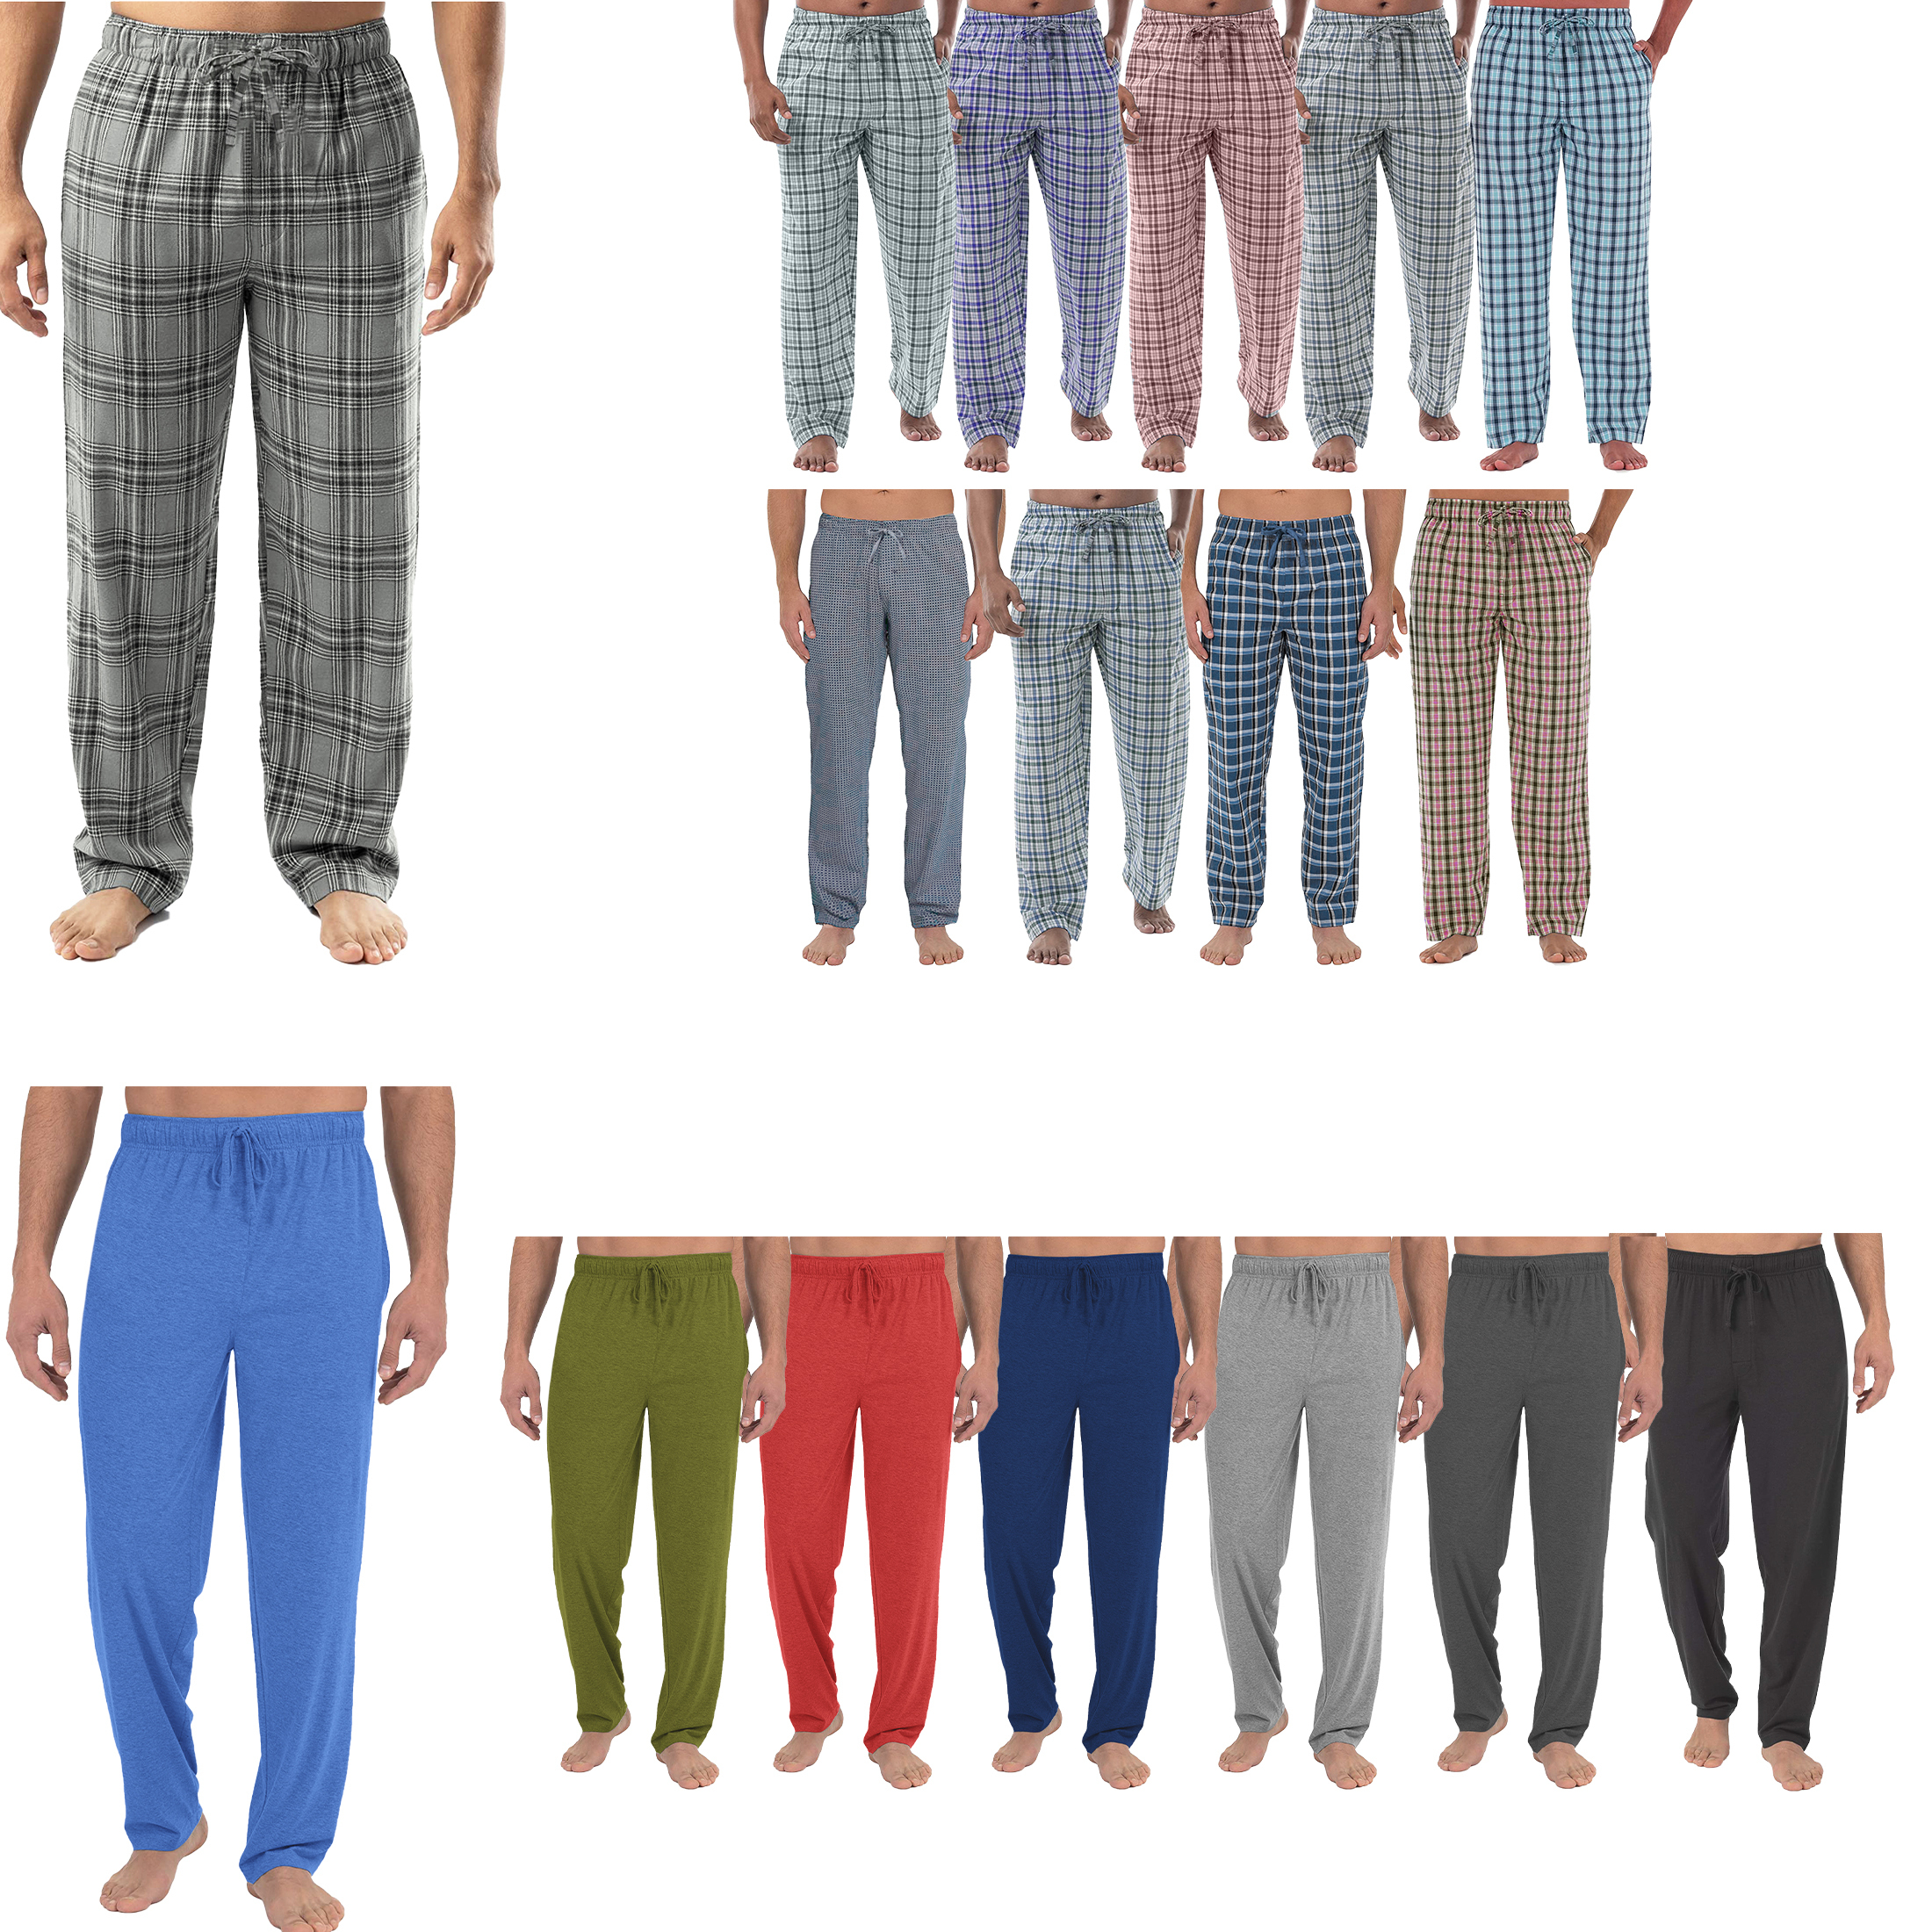 Men's Soft Jersey Knit Long Lounge Sleep Pants With Pockets - Solid, X-Large